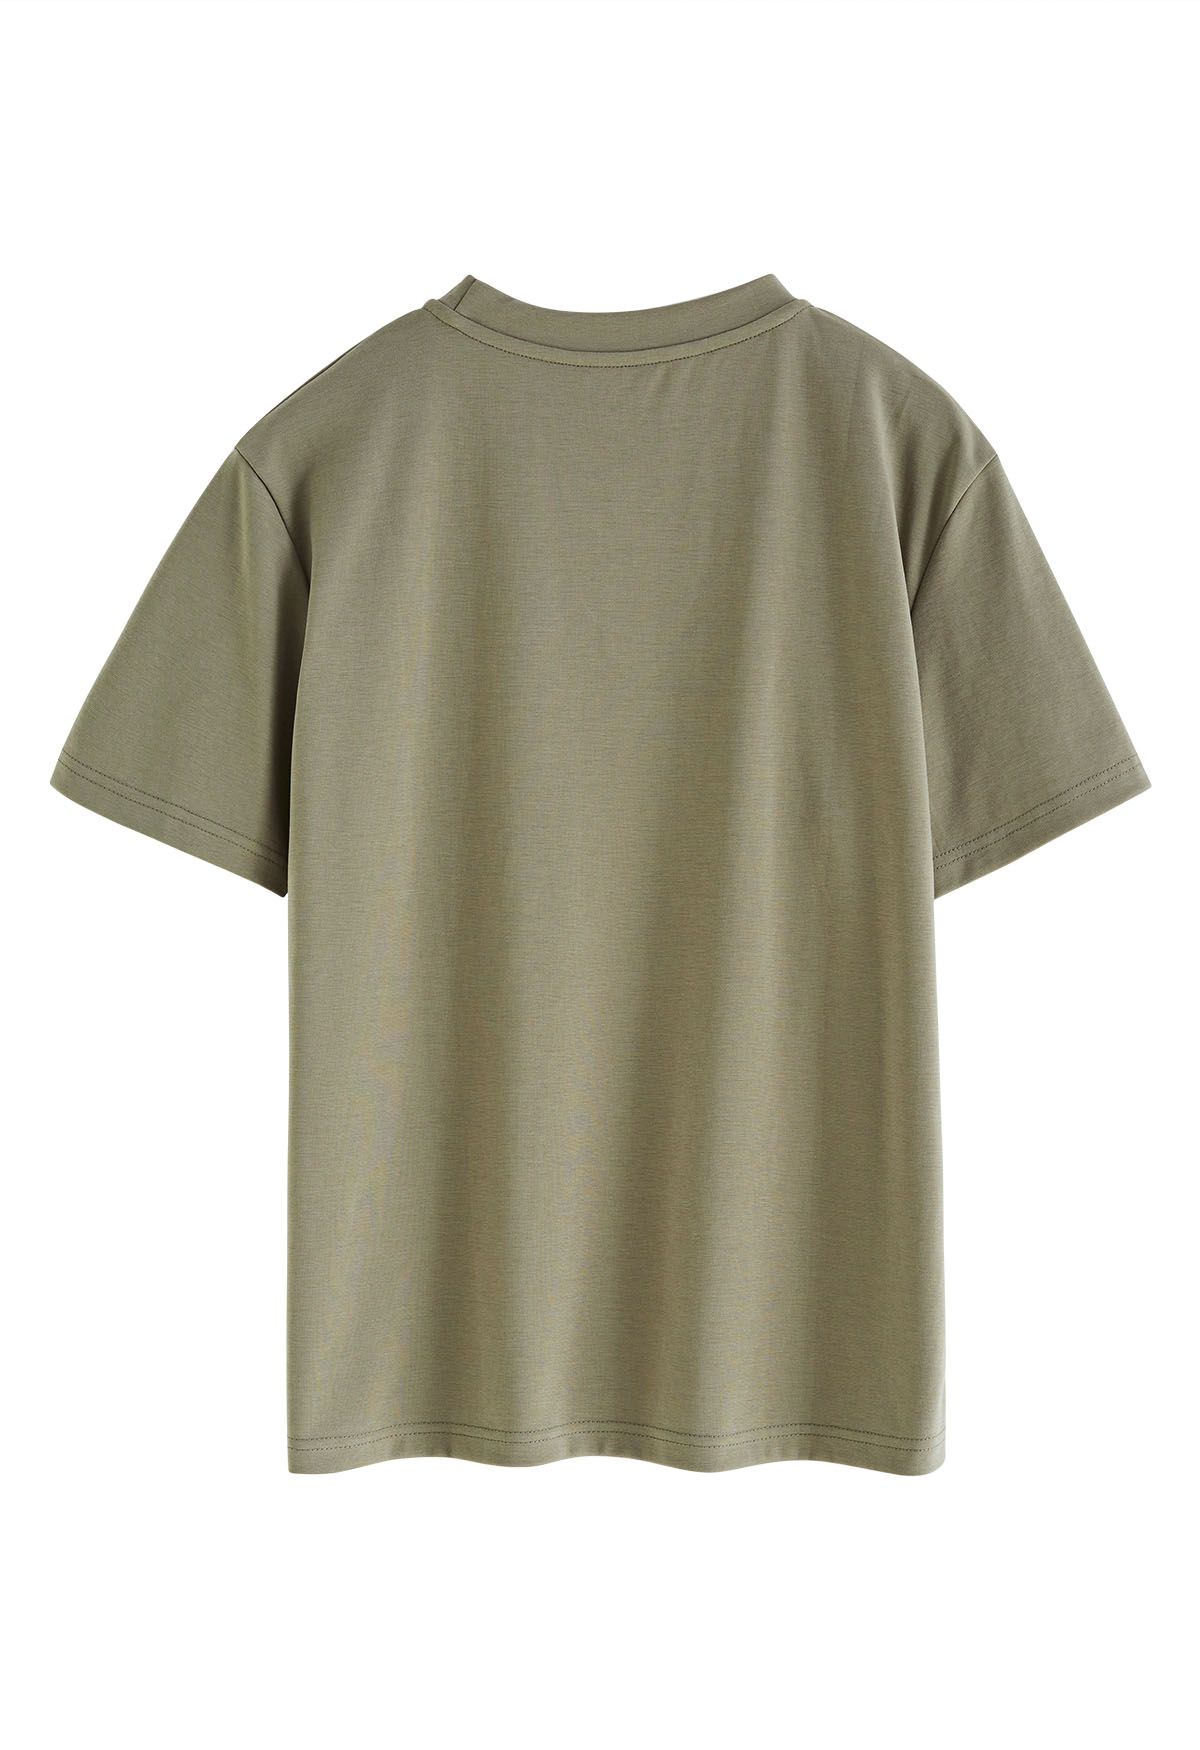 Vision Print Sequin Crew Neck T-Shirt in Sage